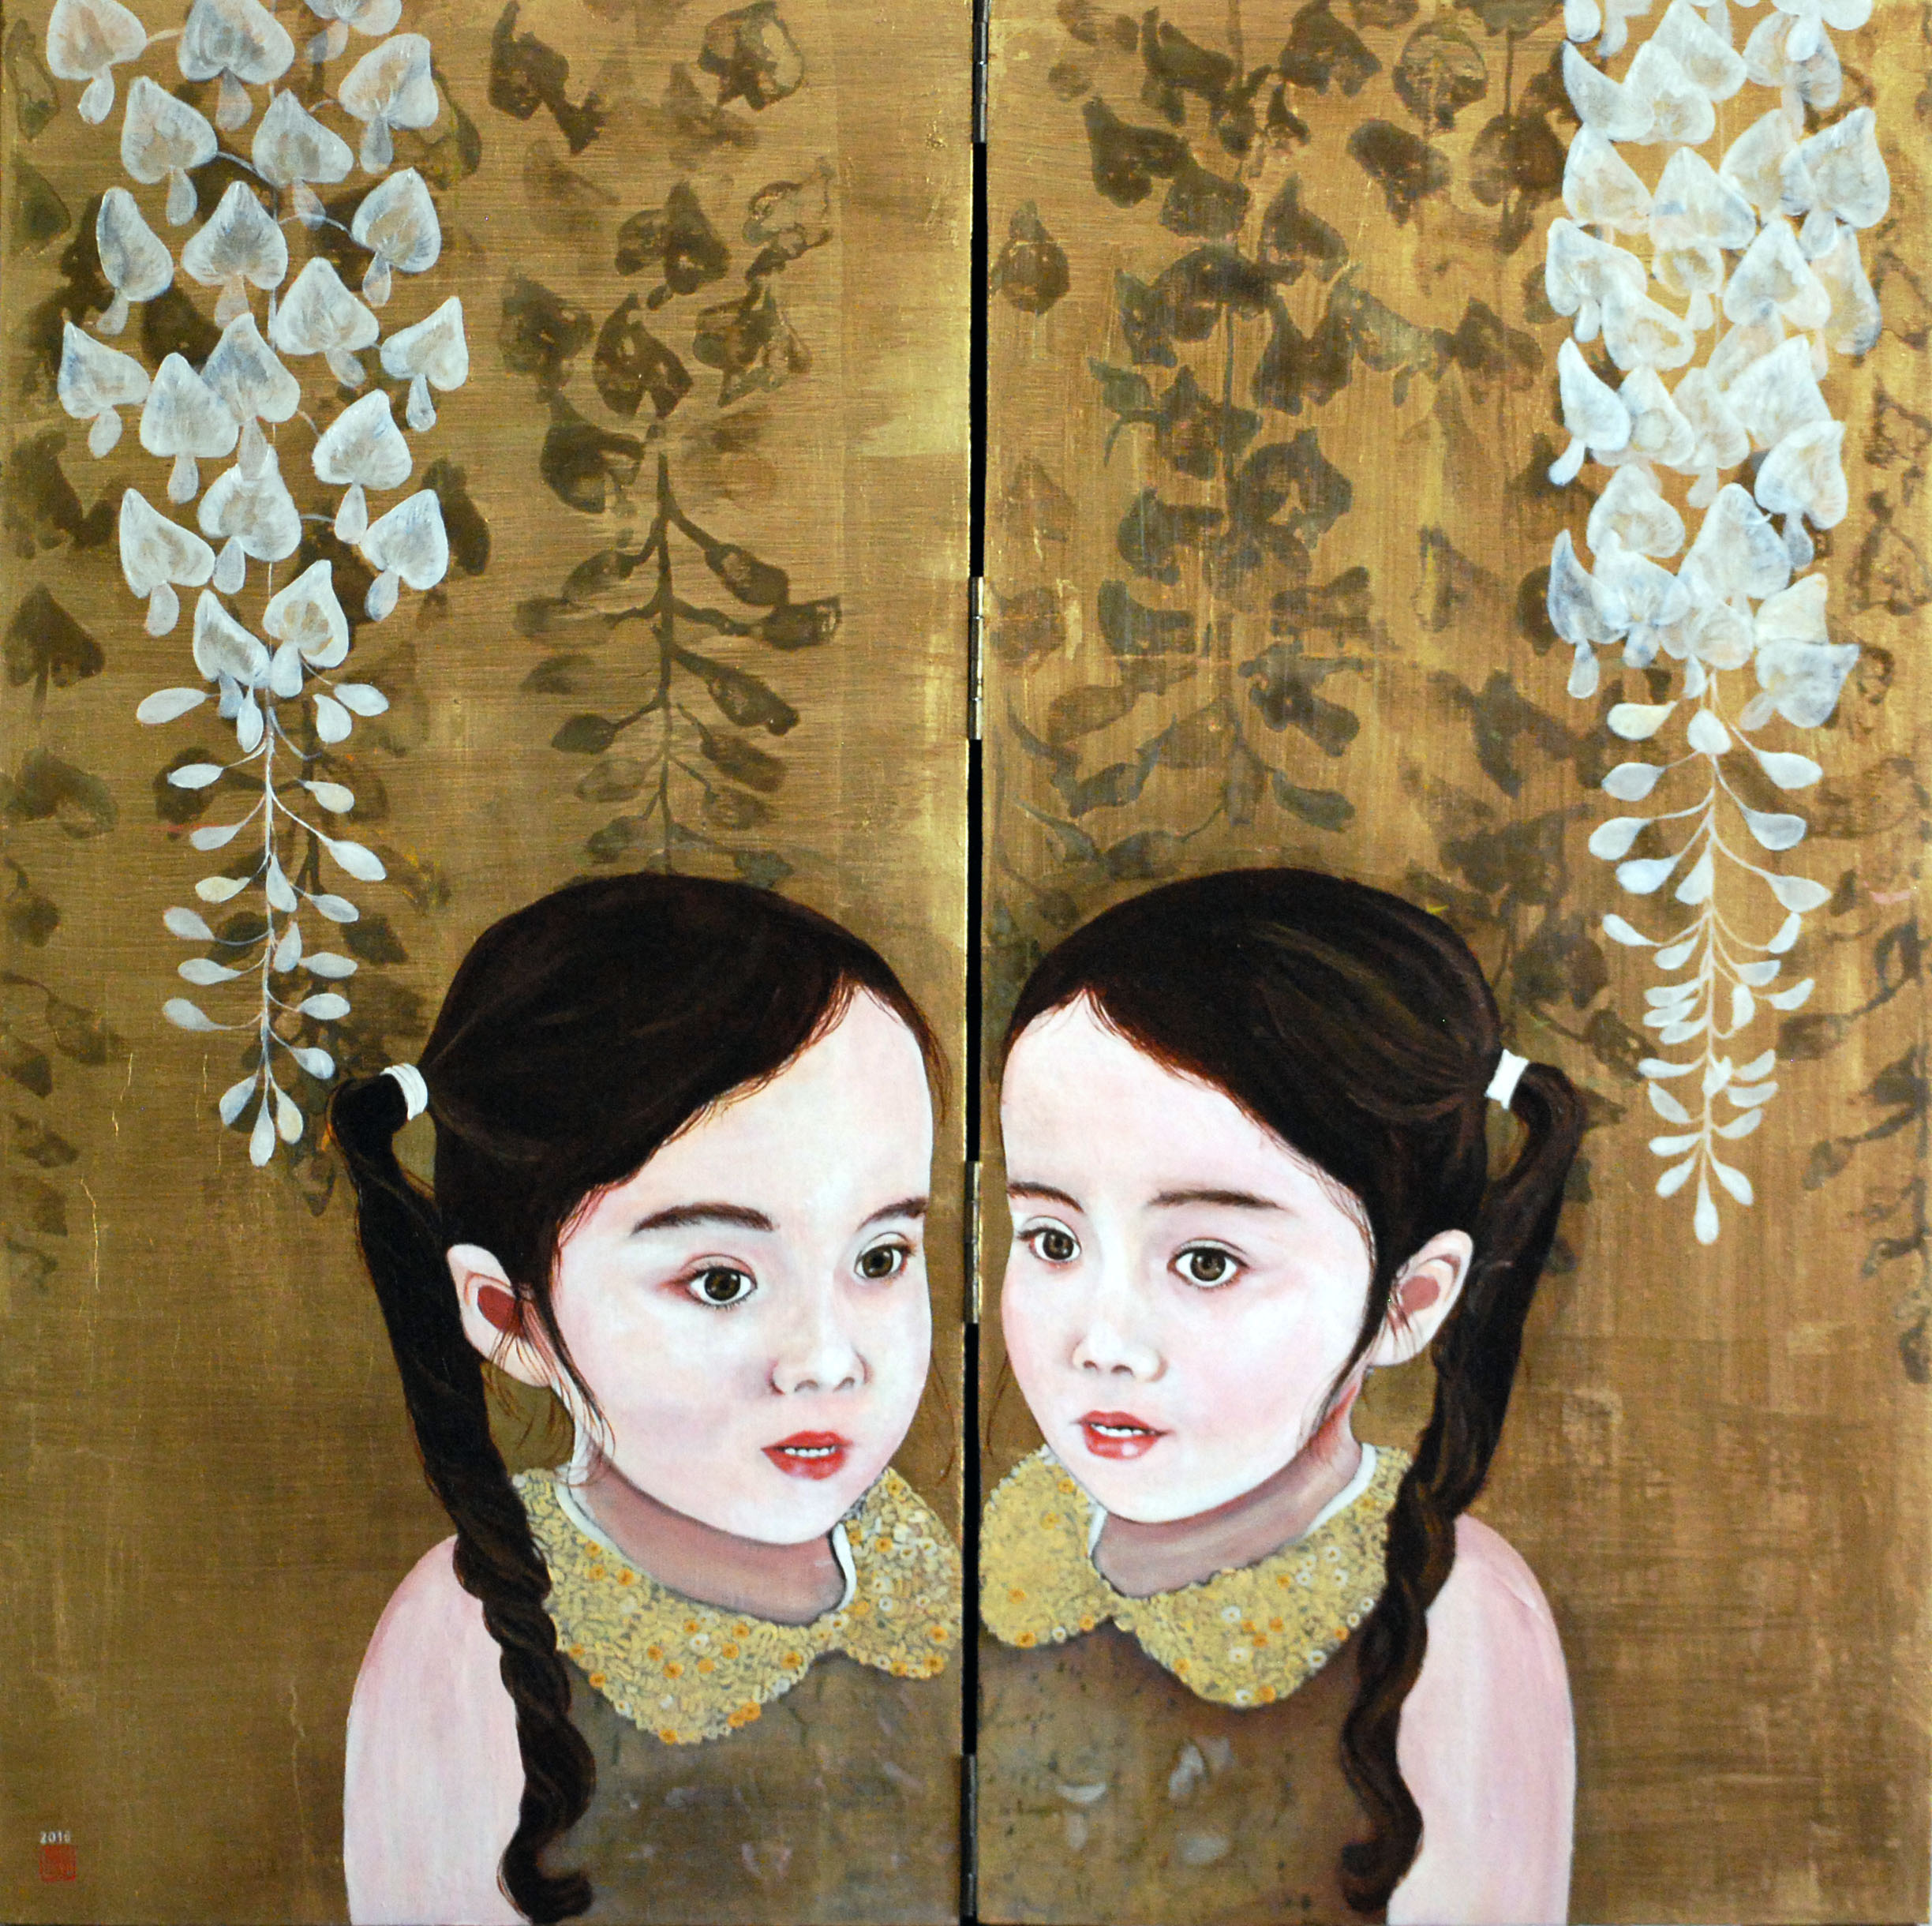 Alba, 2016, Oil and patina on gold-leafed panel, 24” x 24”